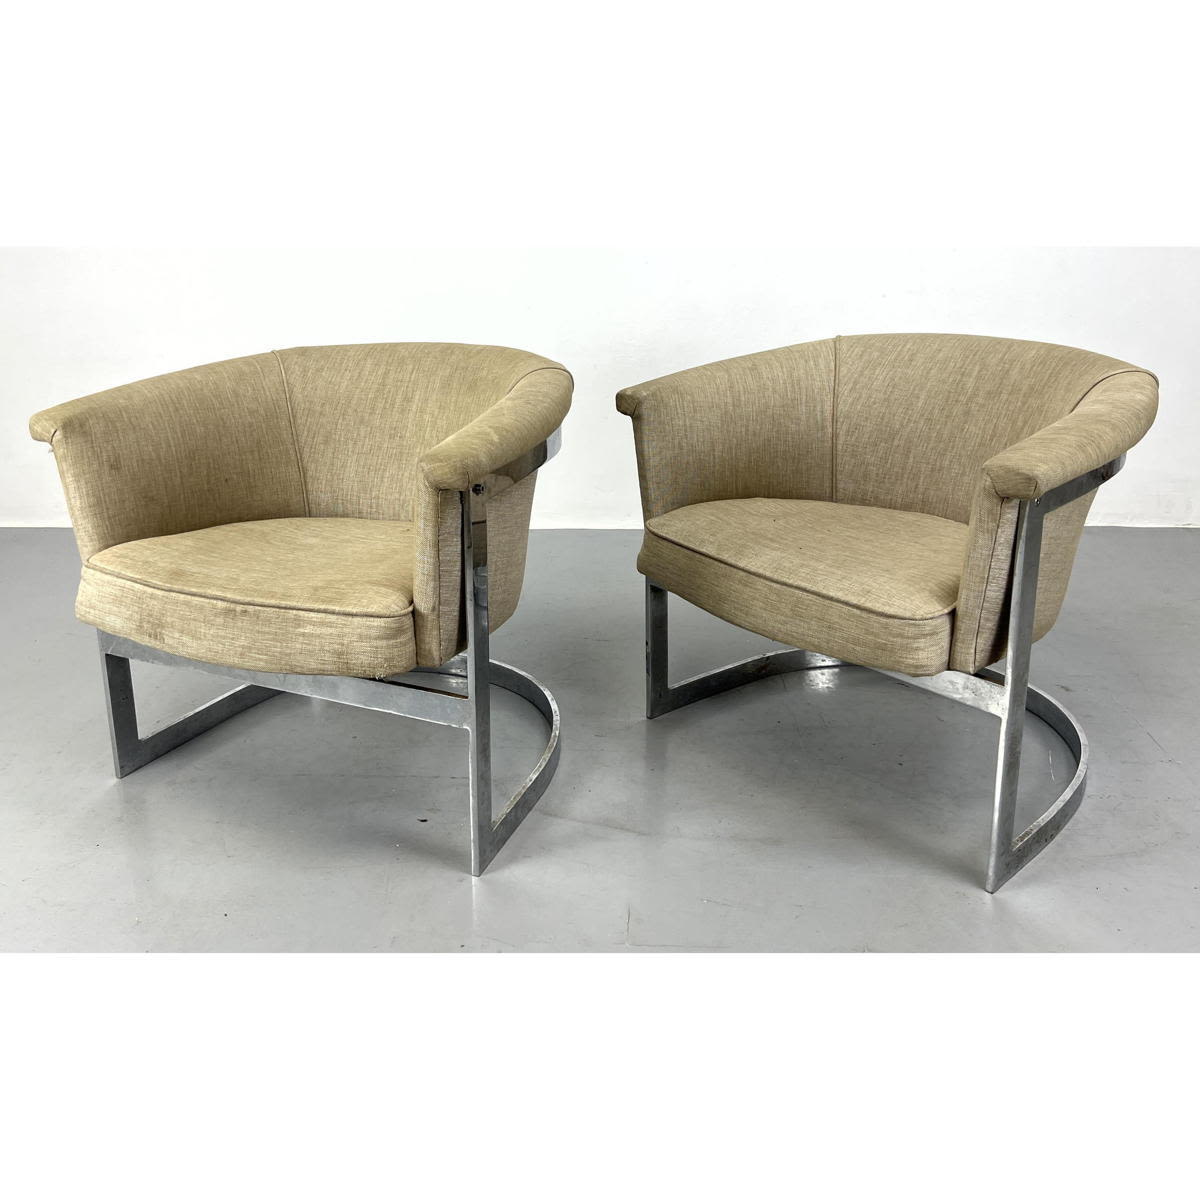 Pr American 1970 s lounge chairs 2a7837